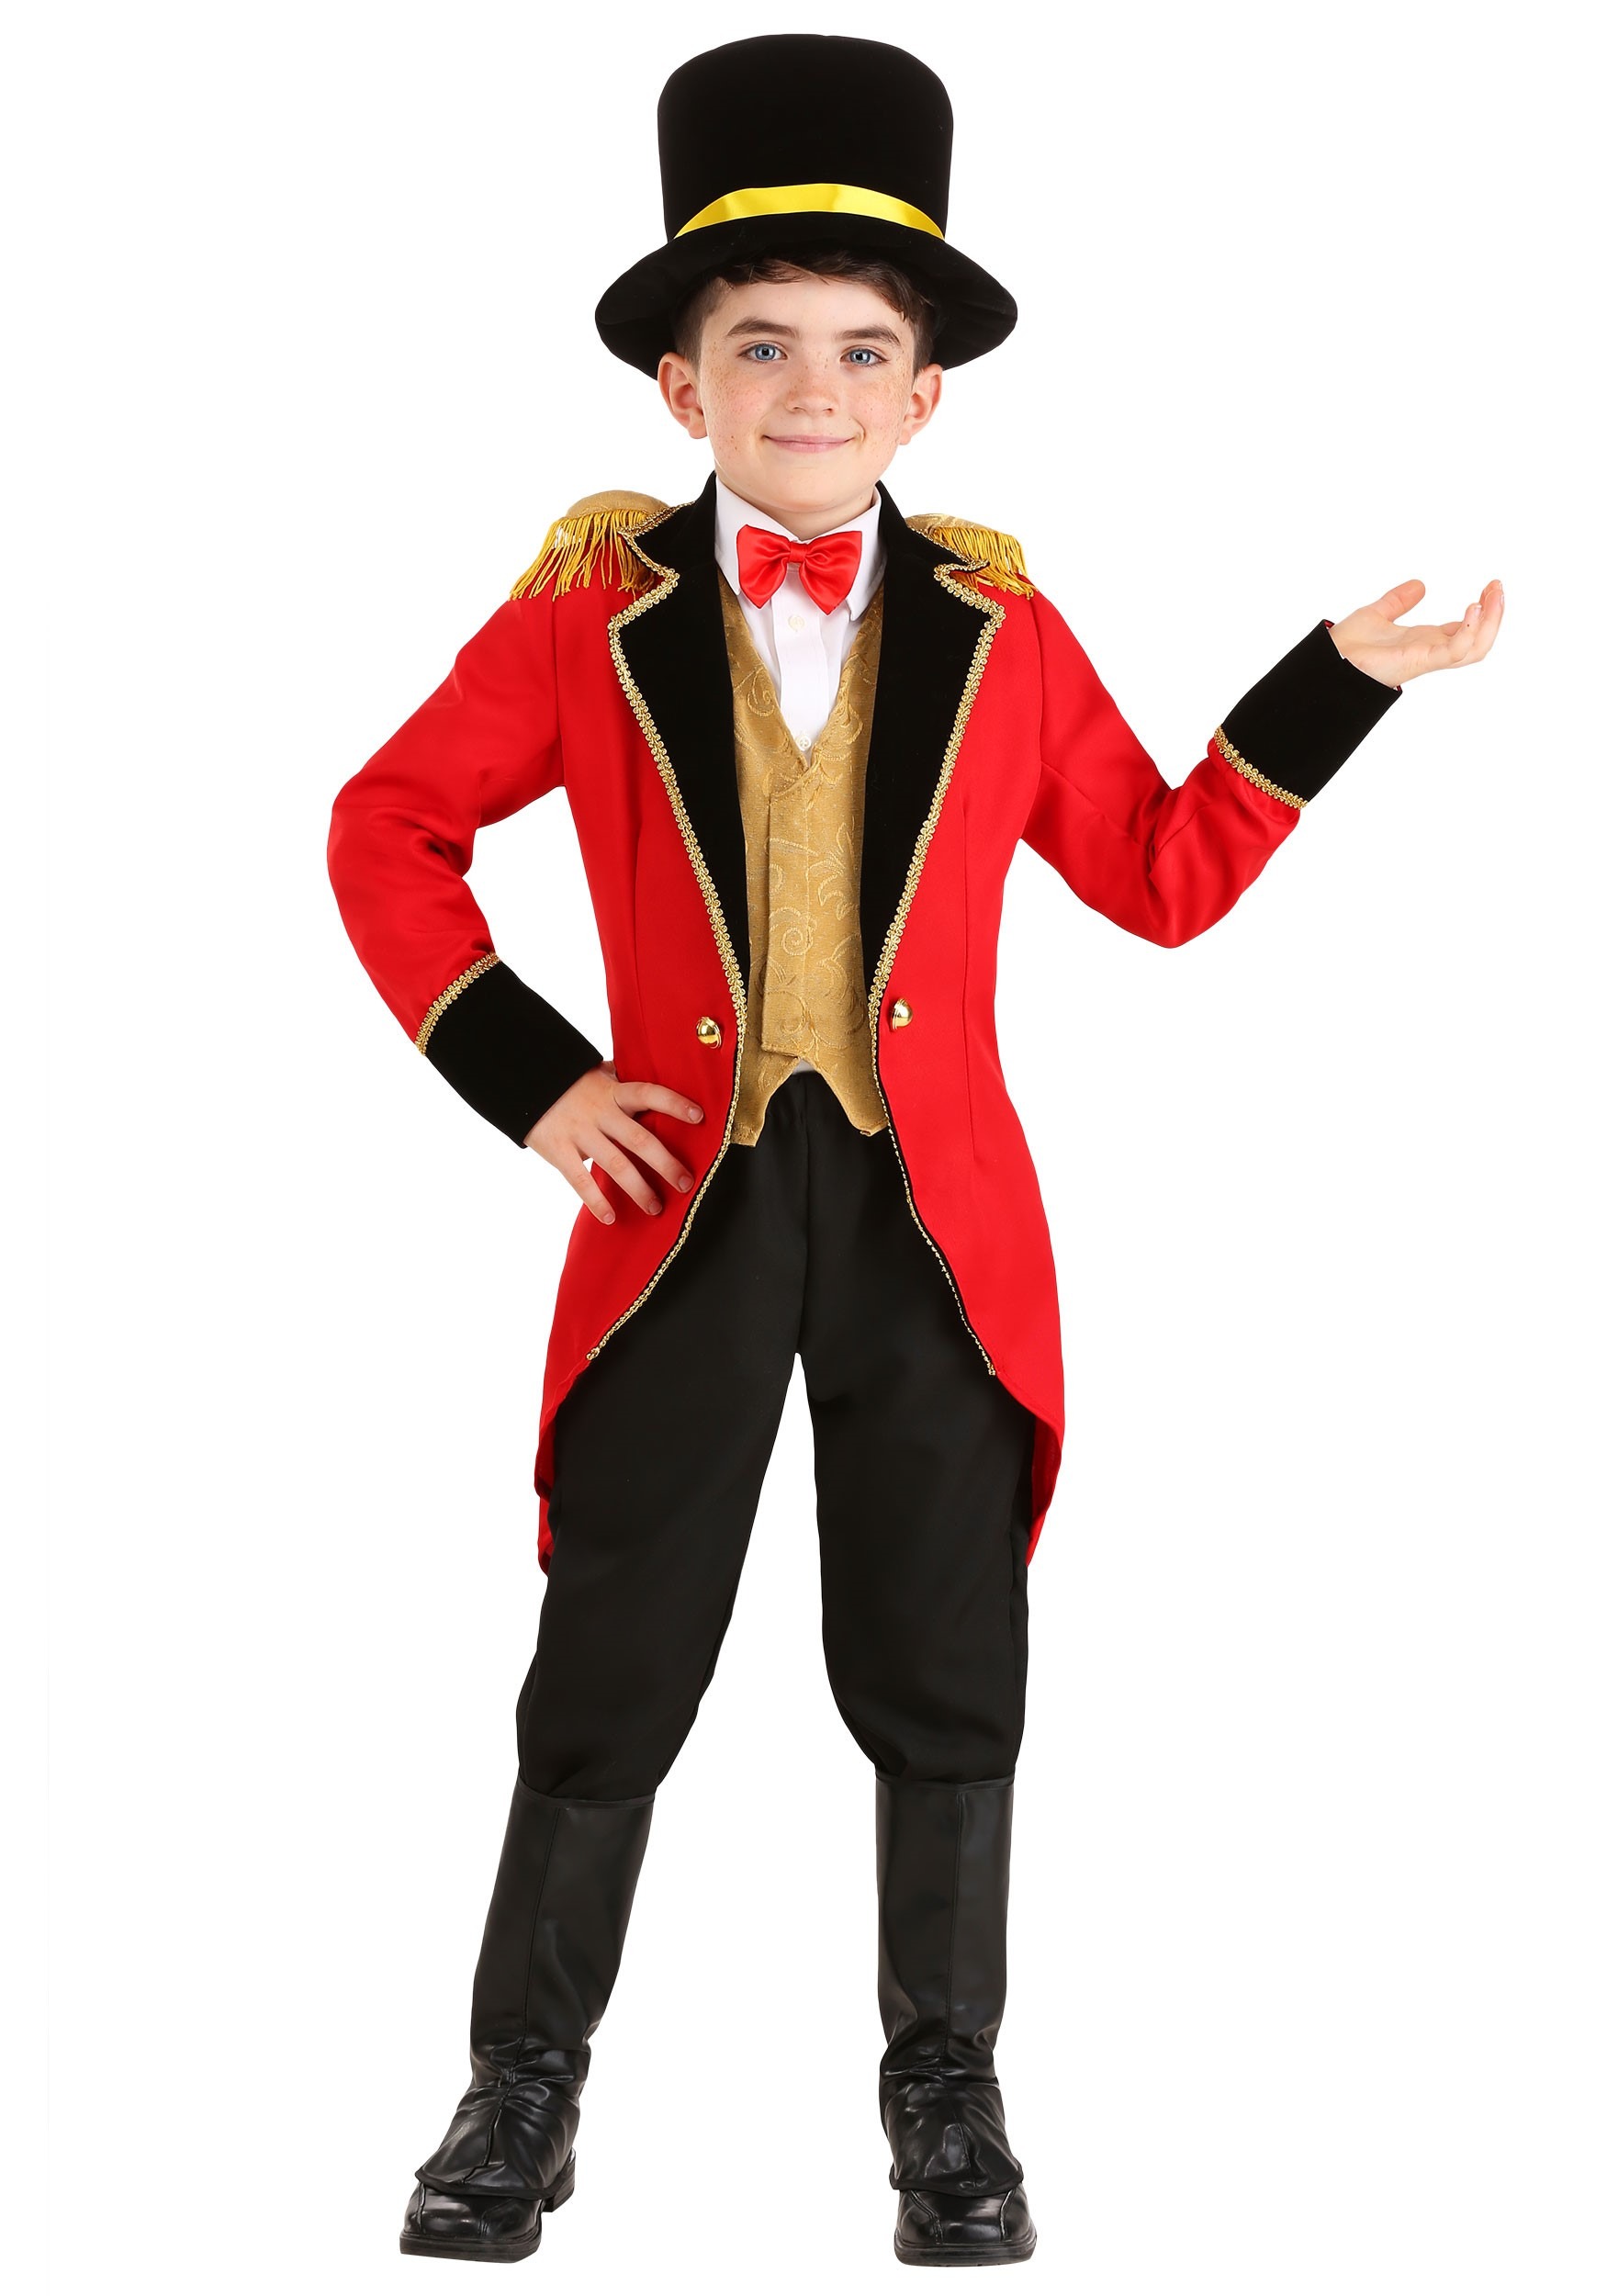 Ringmaster Costume for Kids | Circus Costumes for Kids